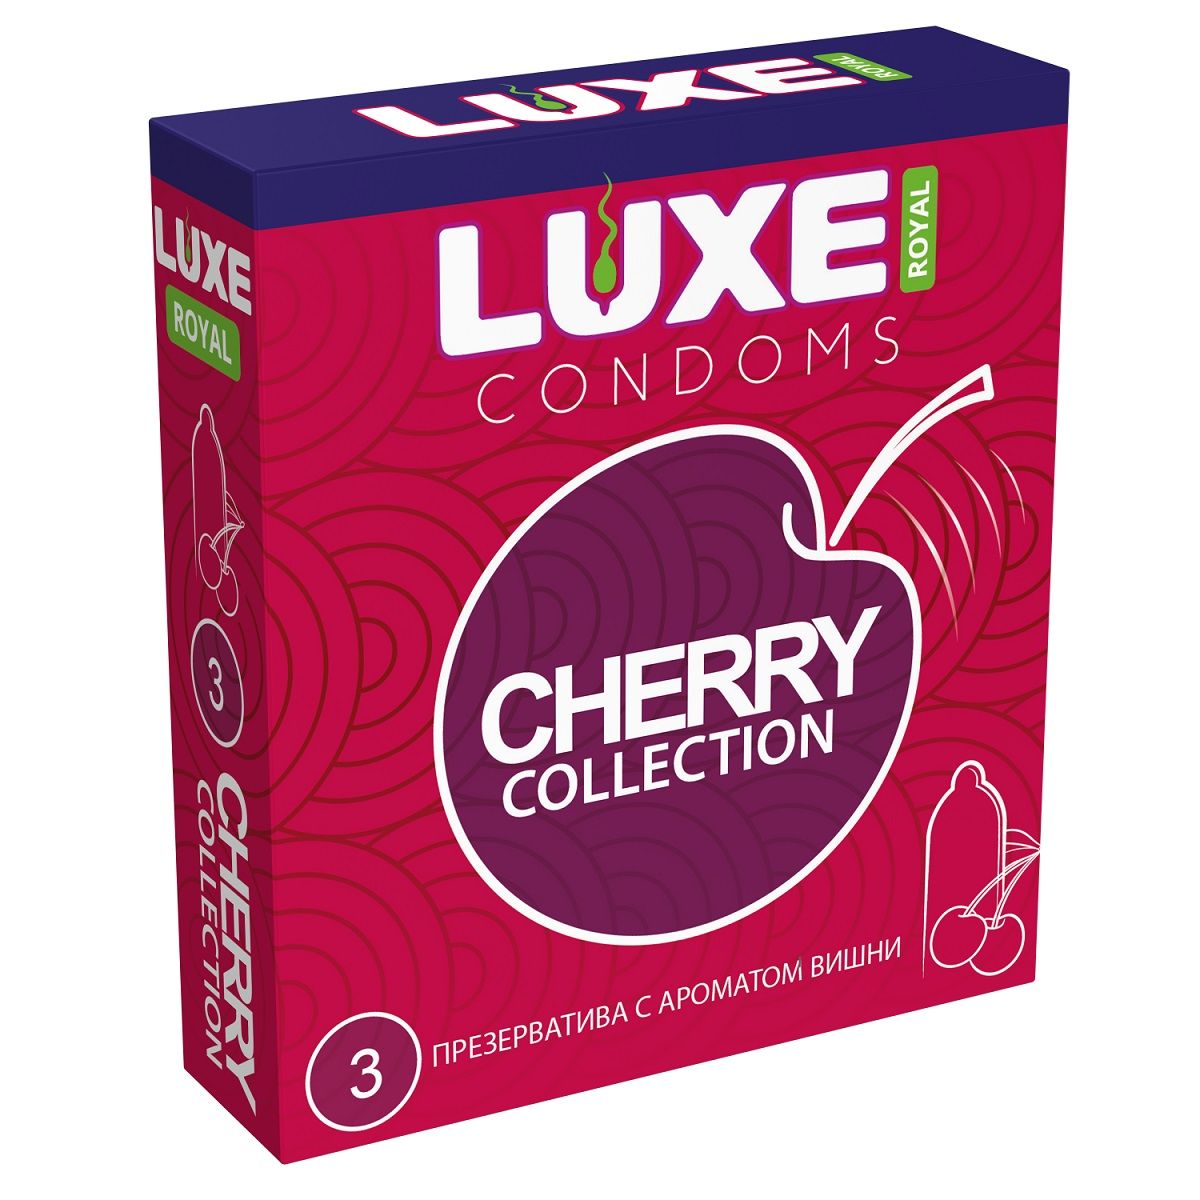     LUXE Royal Cherry Collection - 3 .